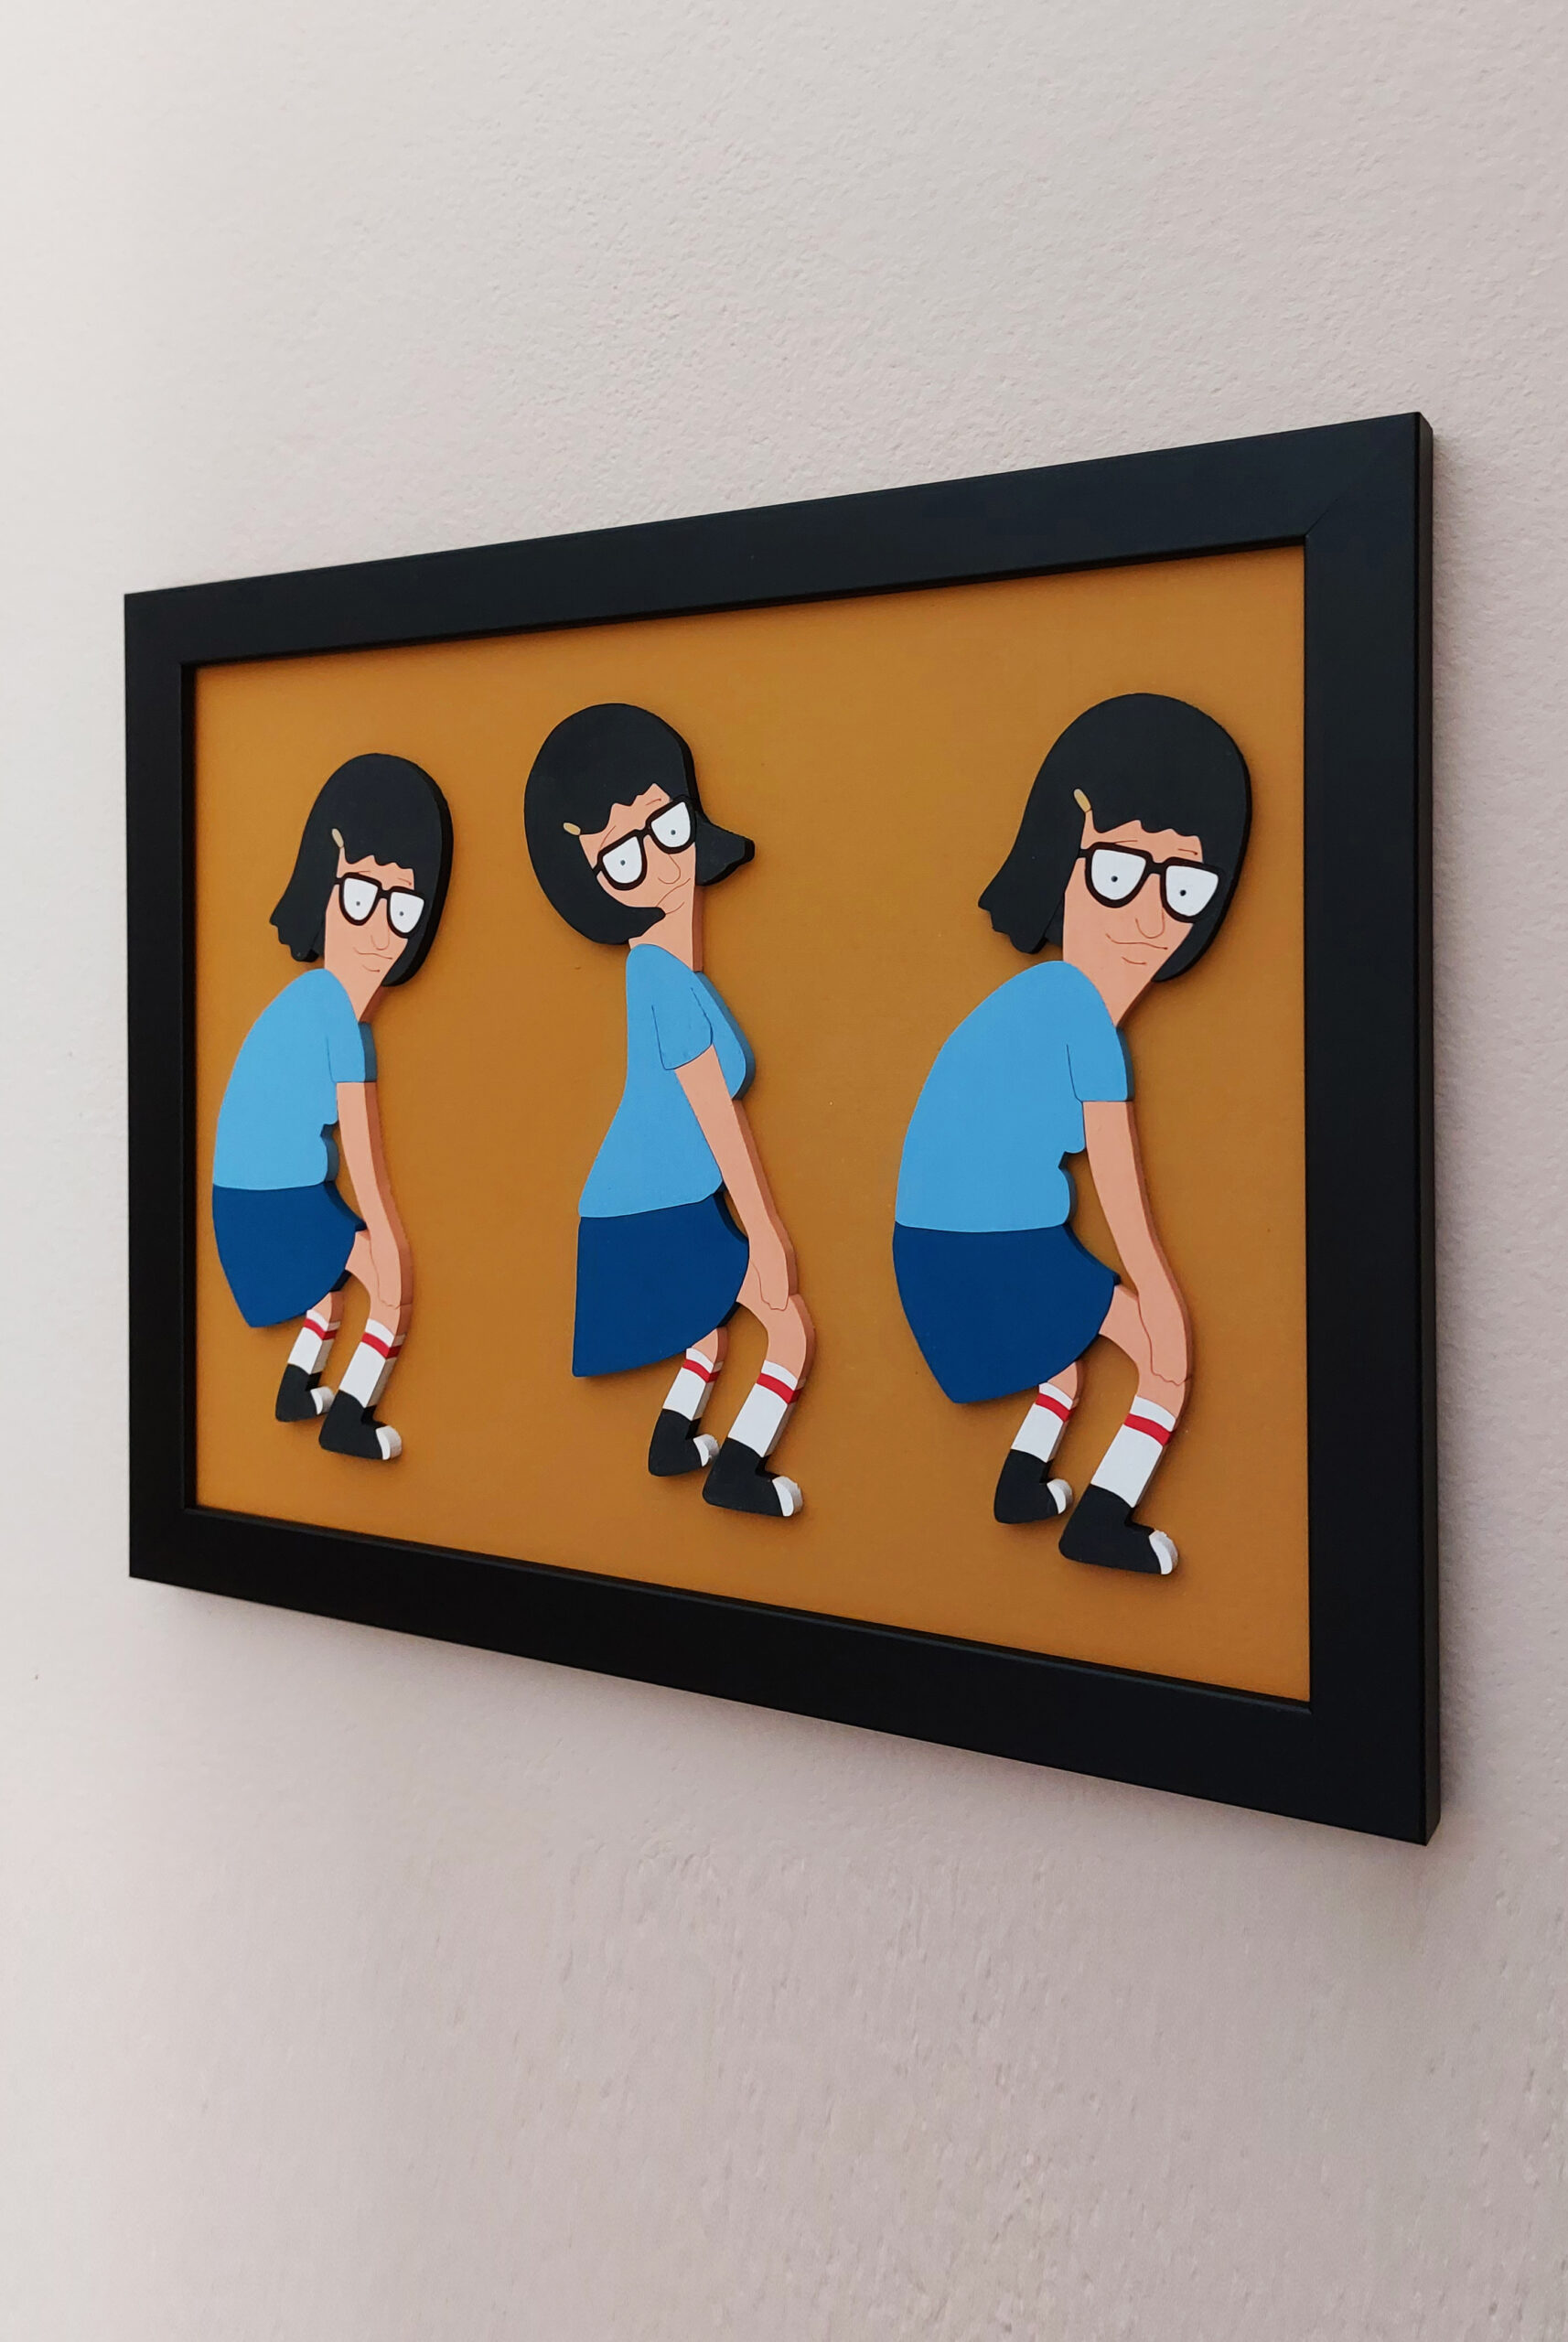 I made Tina Belcher twerking from Bob’s Burgers as a wood wall half. I am hoping you indulge in it.